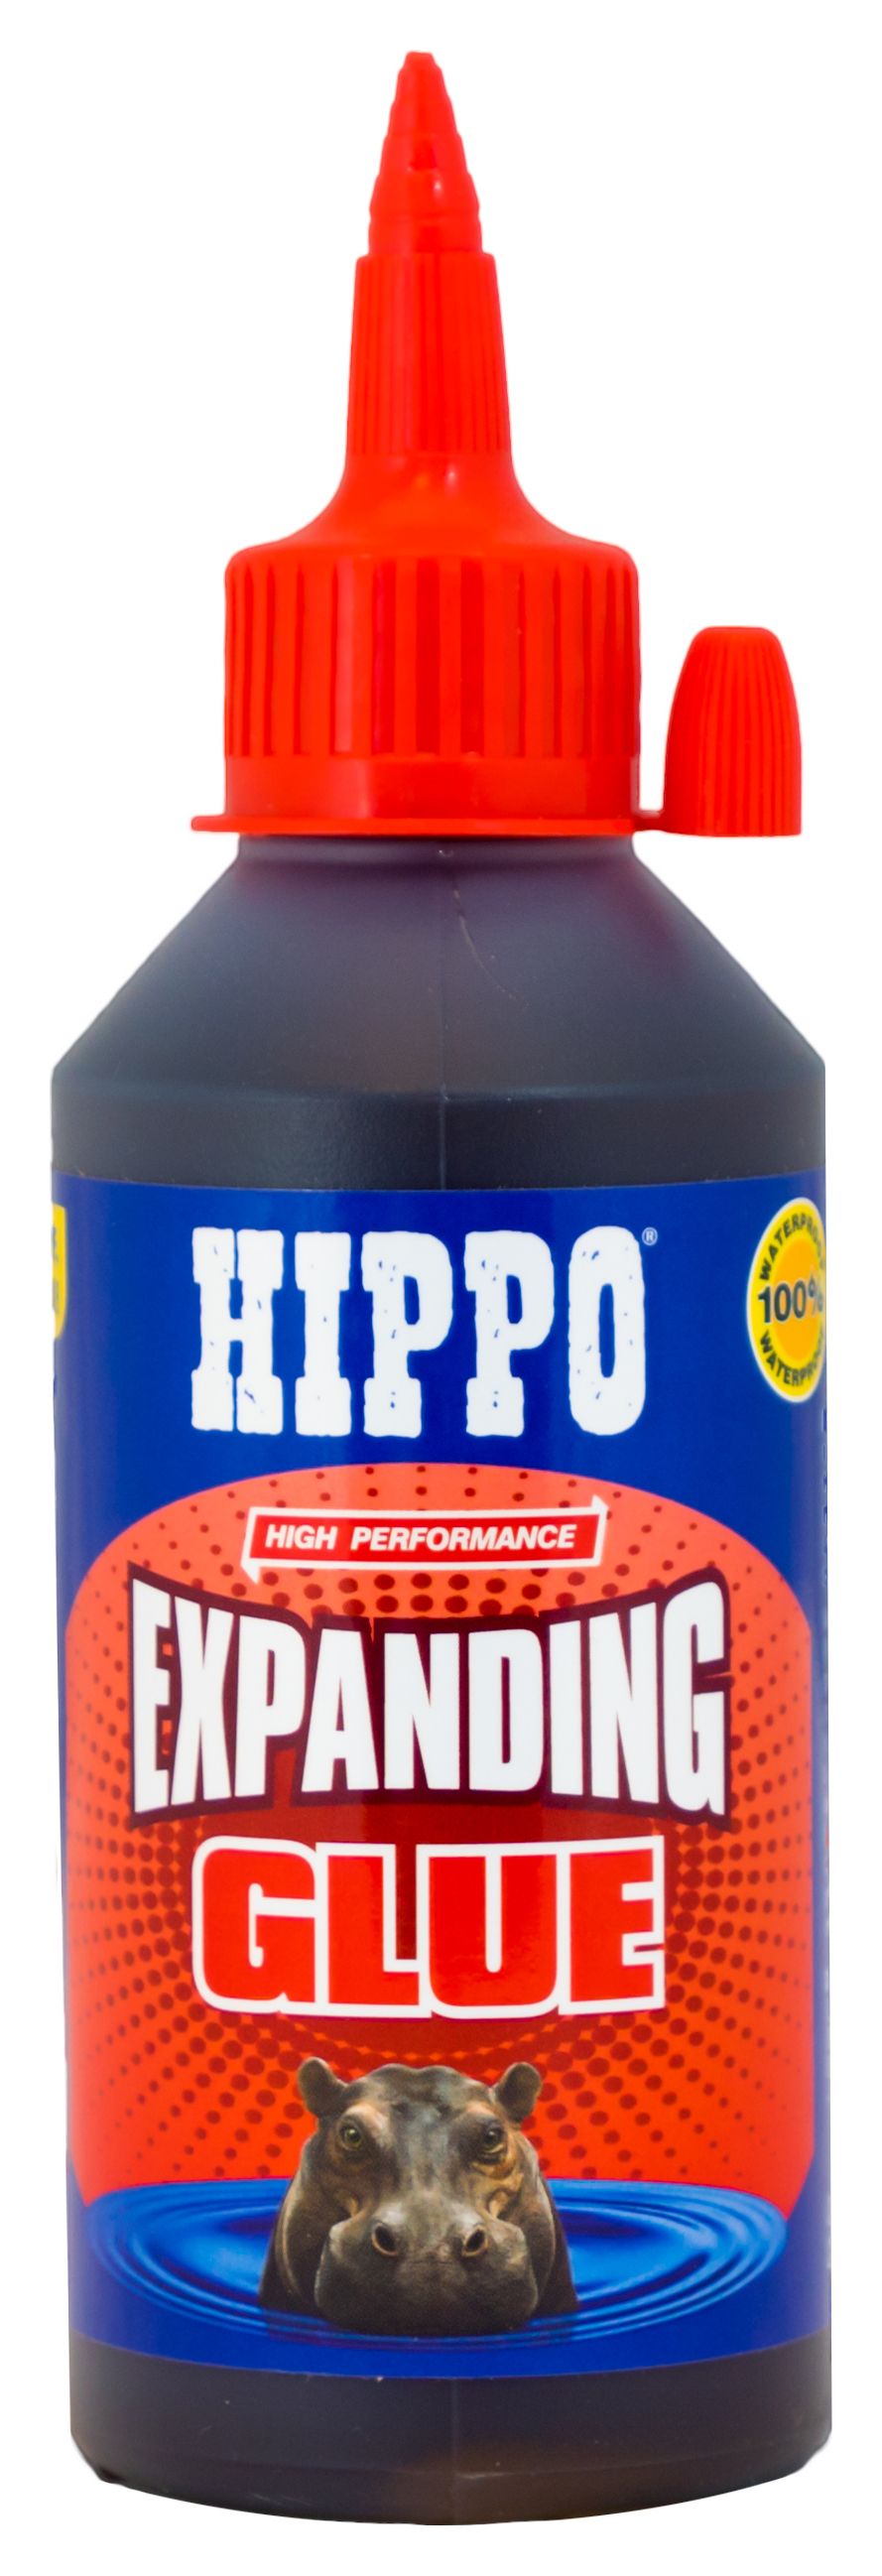 Image of Hippo High Performance Expanding Glue - 275 ml